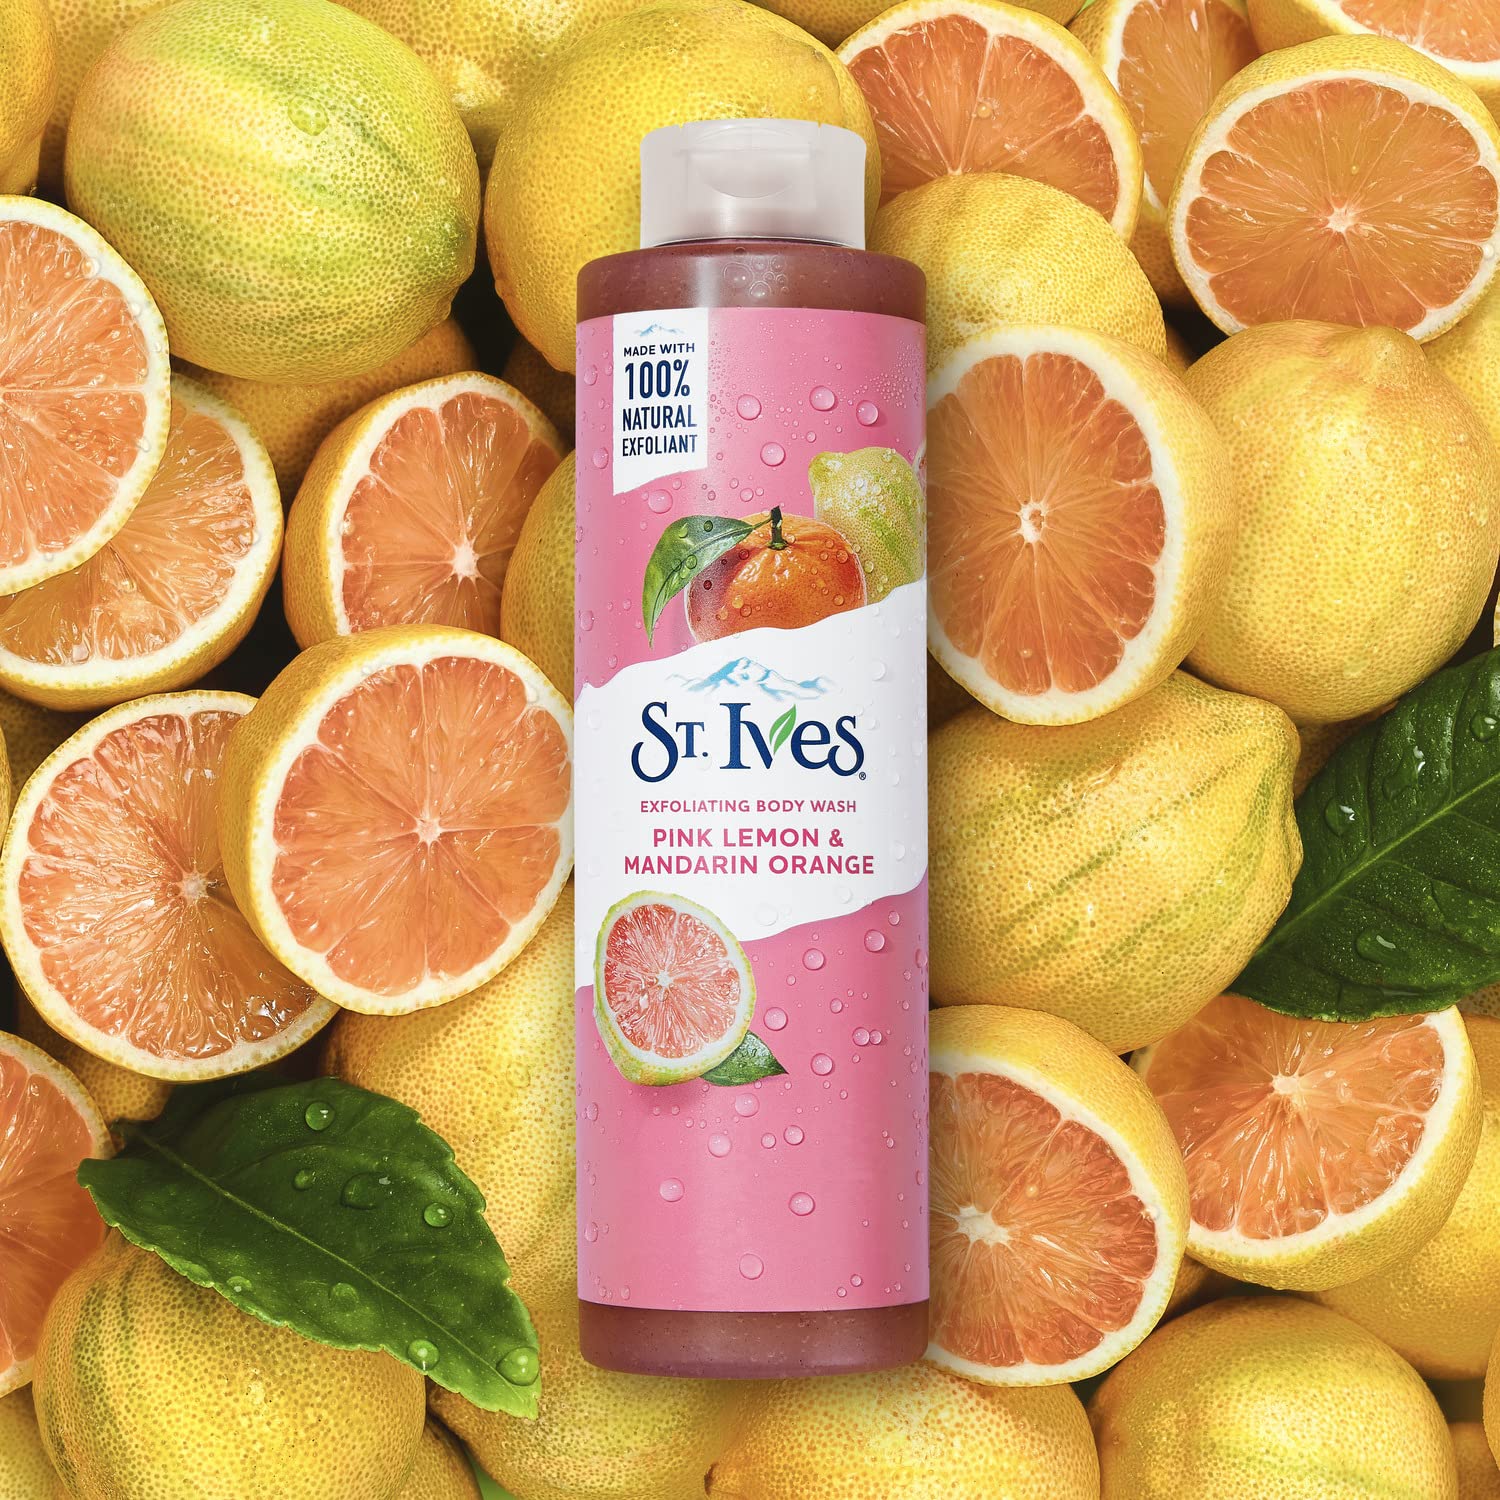 St. Ives Exfoliating Body Wash - Pink Lemon Body Wash for Women with Mandarin Orange, Citrus Body Wash, Body Soap, or Hand Soap with 100% Natural Exfoliants for Glowing Skin, 16 Oz Ea (Pack of 2)